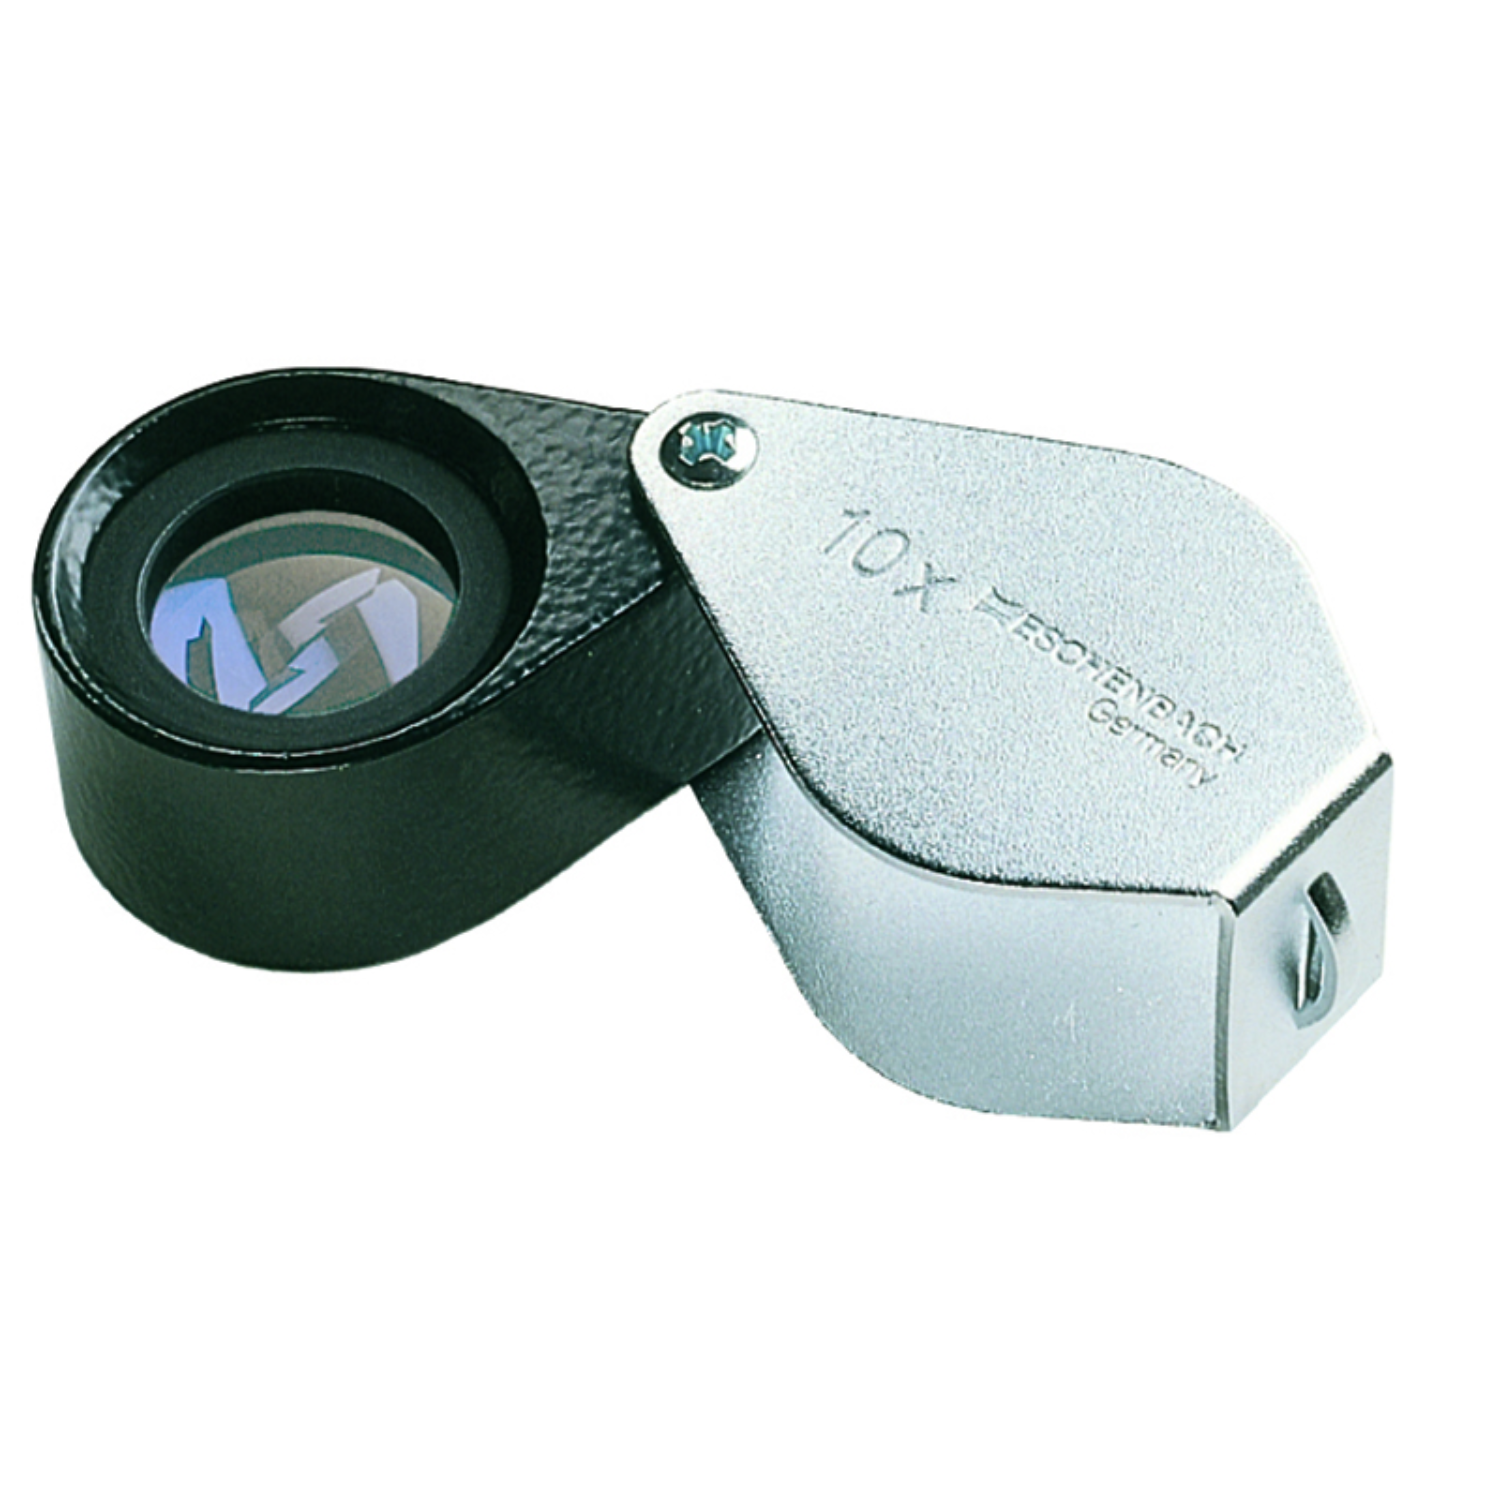 Image of the Eschenbach Folding Achromatic Pocket Magnifier available in 10x and 20x.